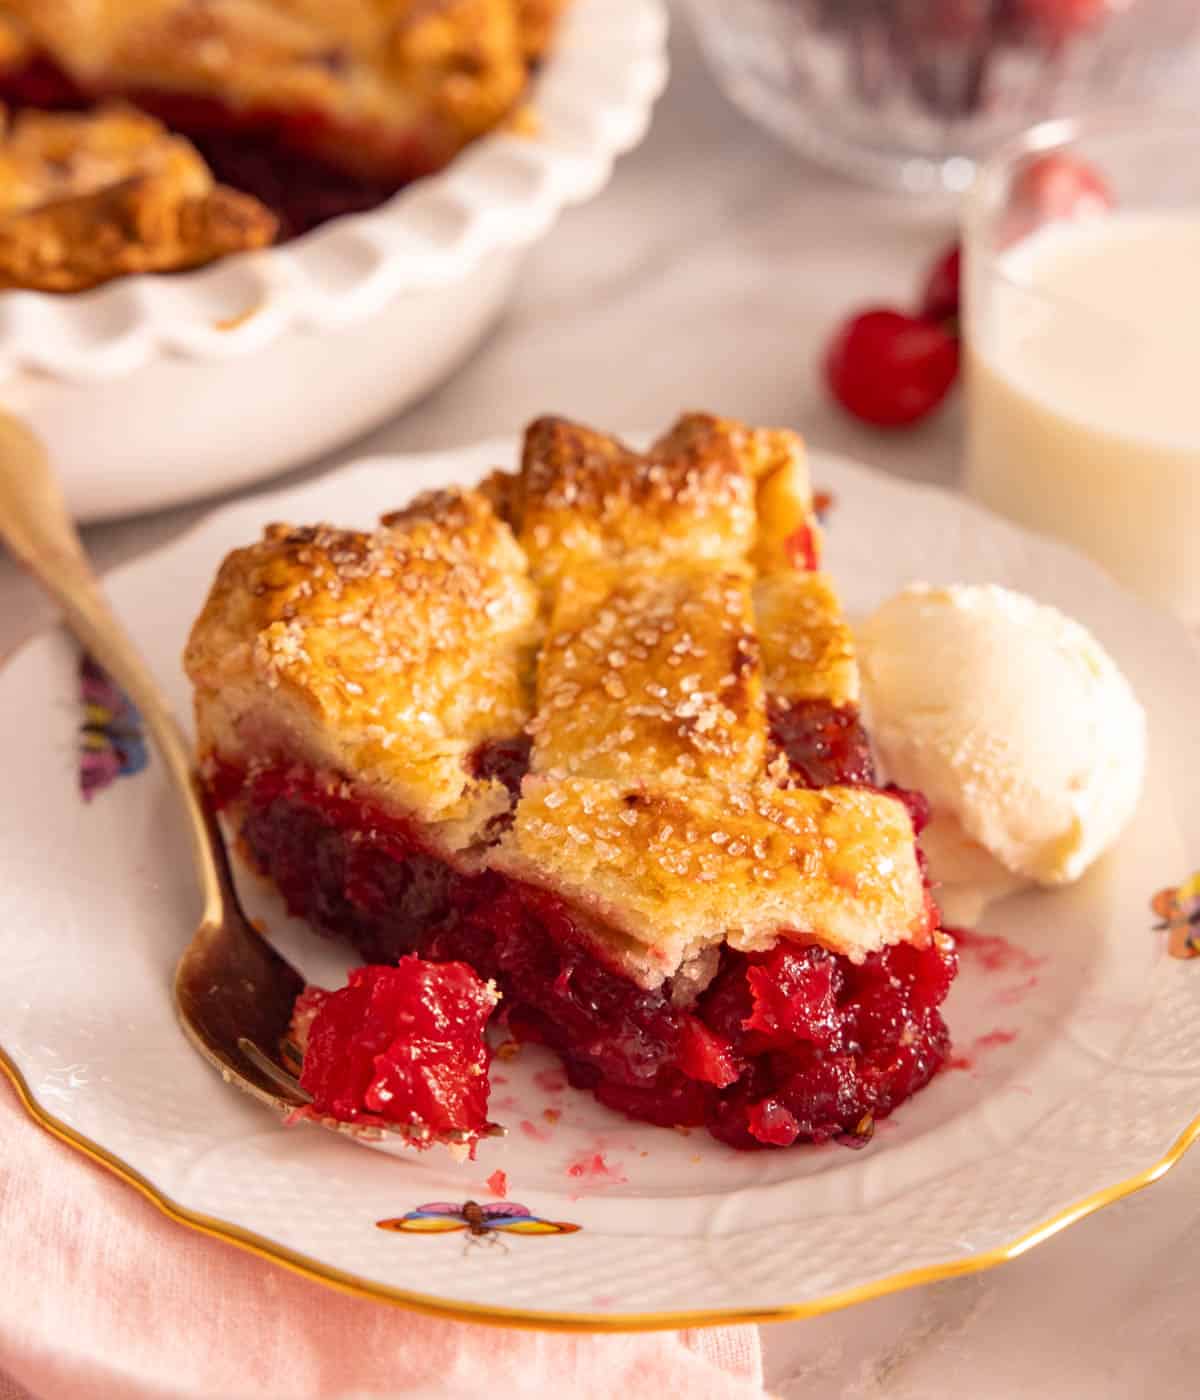 A slice of cherry pie with a fork and scoop of ice cream beside it.